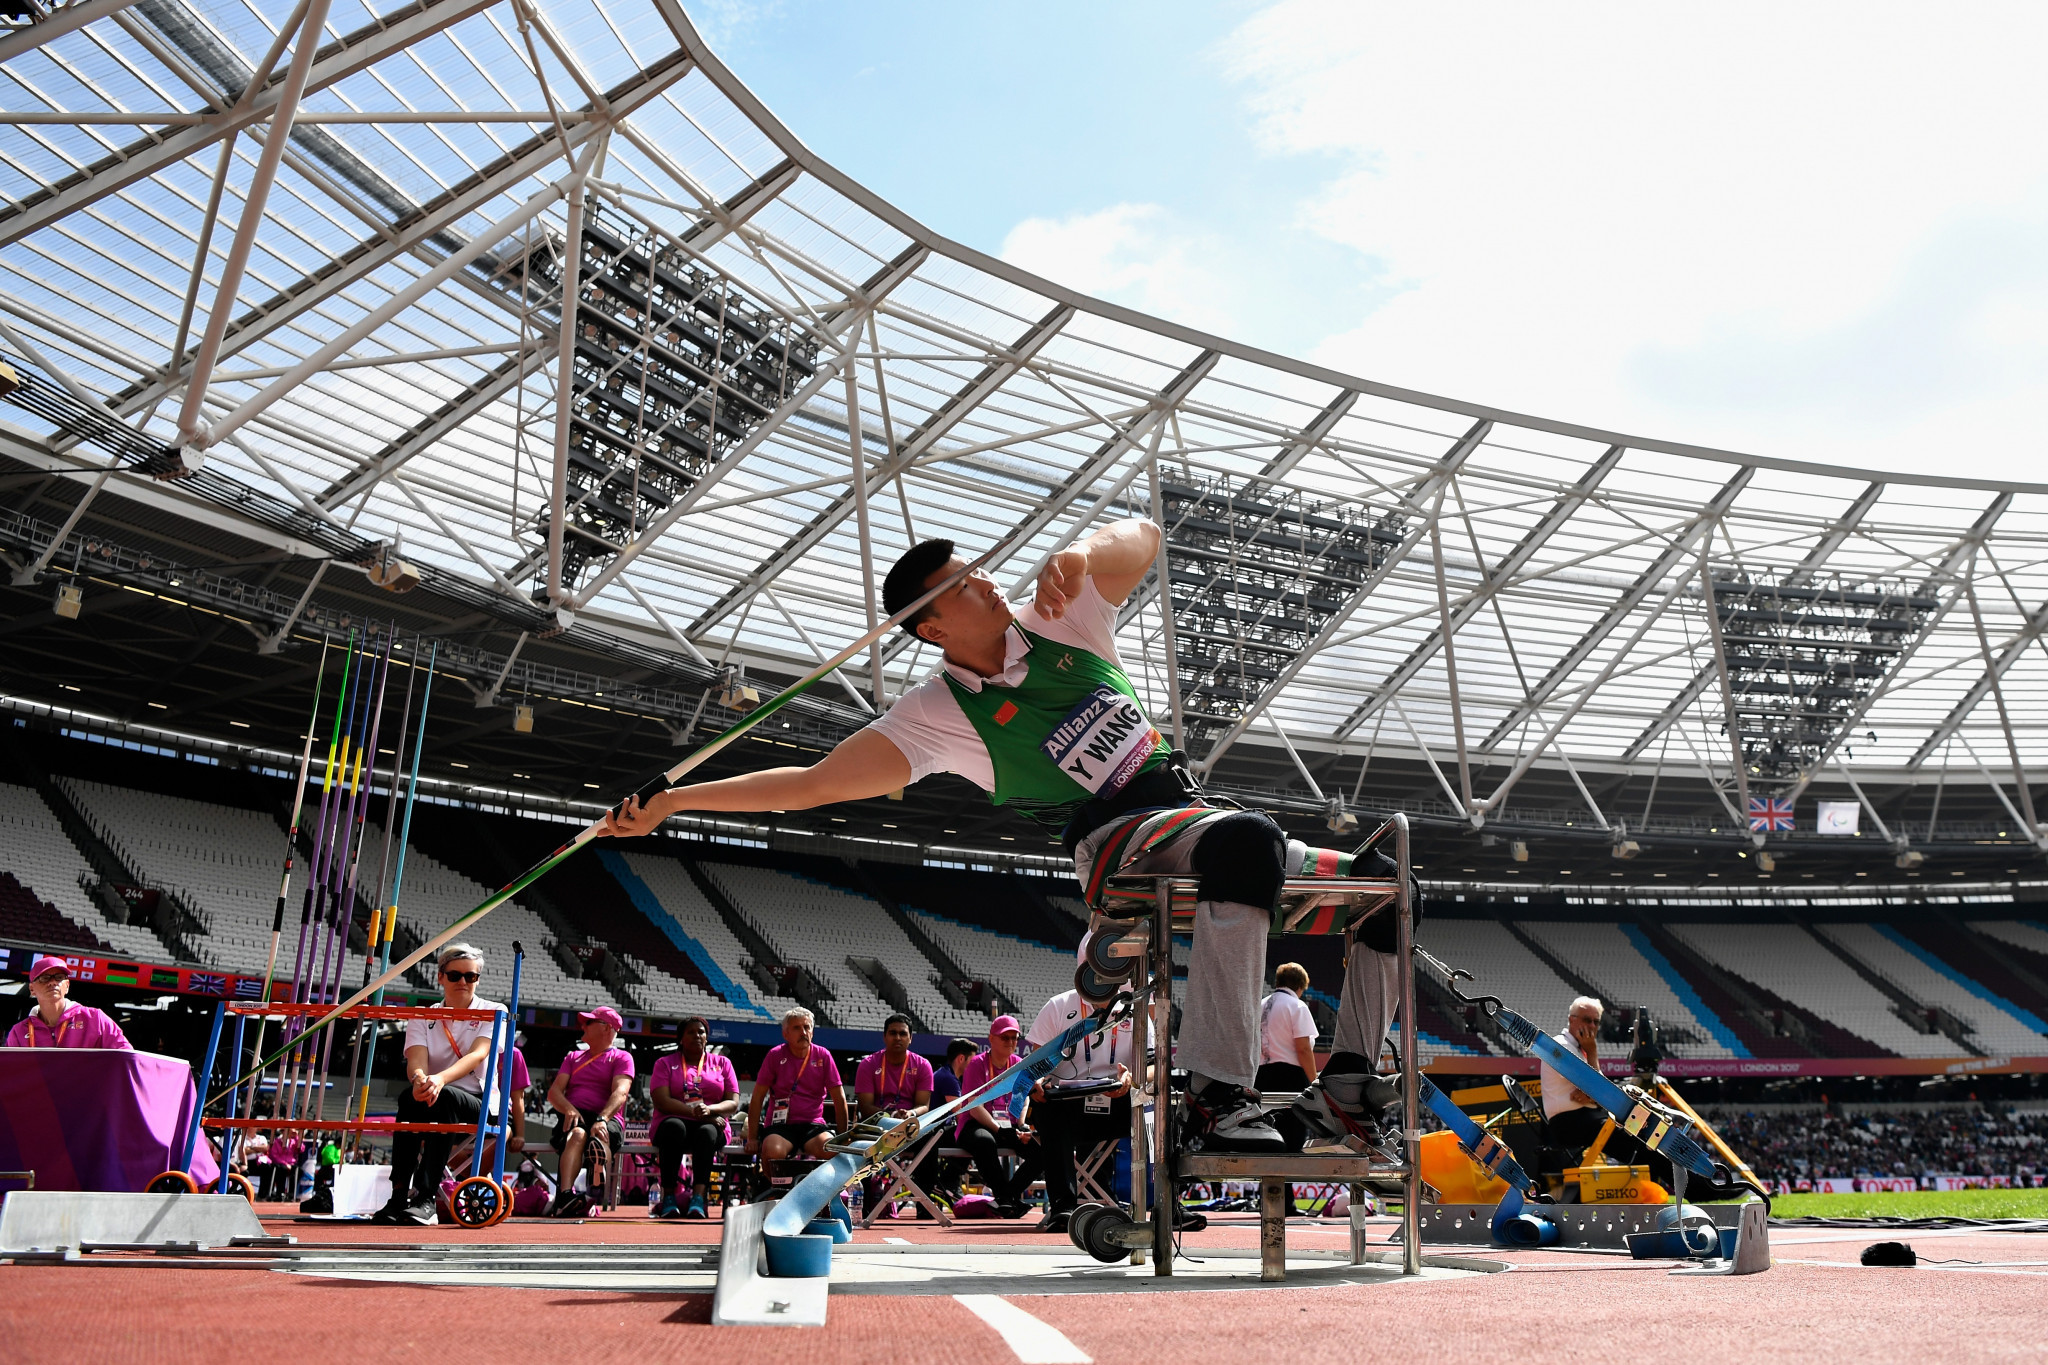 BP also backed last year's World Para Athletics Championships in London ©Getty Images